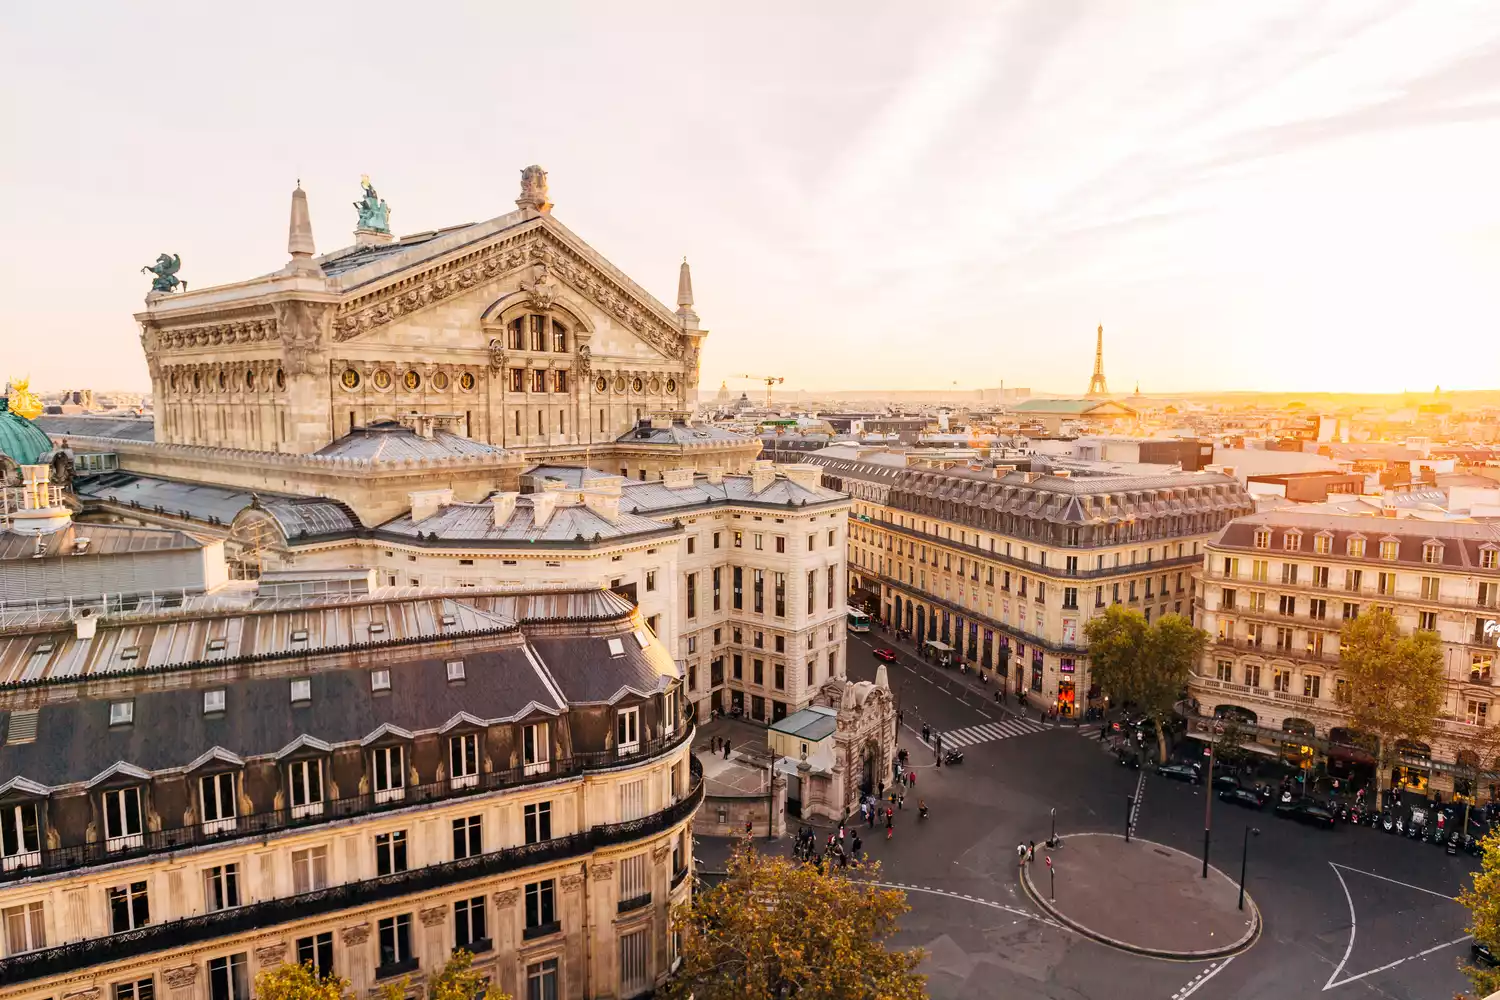 From Miami to Paris, nonstop flights are now available for less than $220 one way.